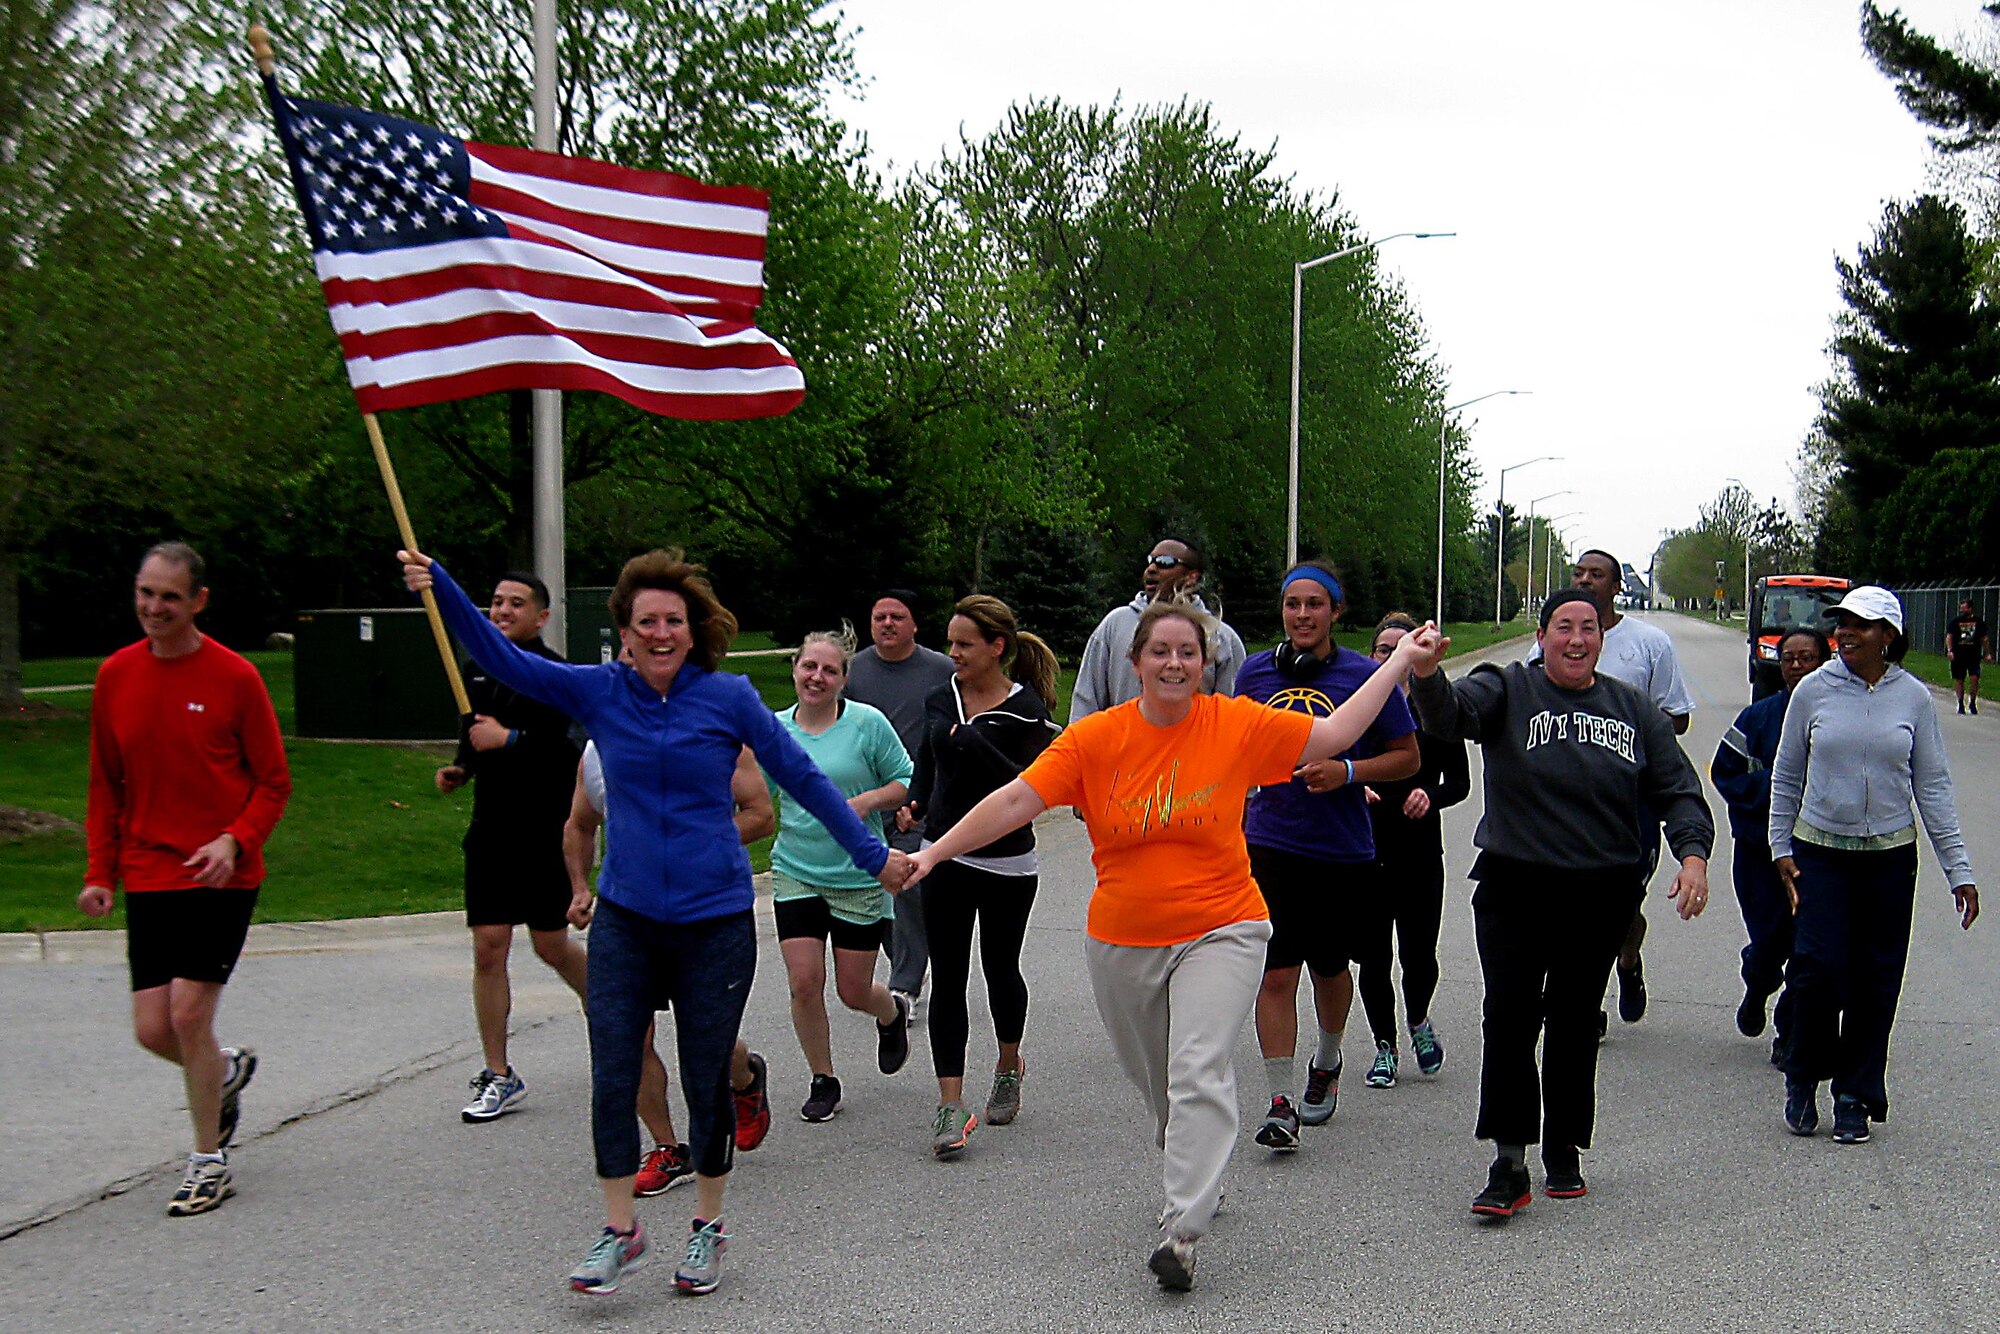 Participants in the 2016 Plastic Egg Run encourage the final team as they approach the finish line April 27, 2016 at Grissom Air Reserve Base, Ind. At various intervals during the 5K run teams had to stop and select a plastic egg which contained a challenge to complete before moving on to the next station, the final challenge was to hold hands and skip to the finish line. (U.S. Air Force photo/Senior Airman Dakota Bergl)